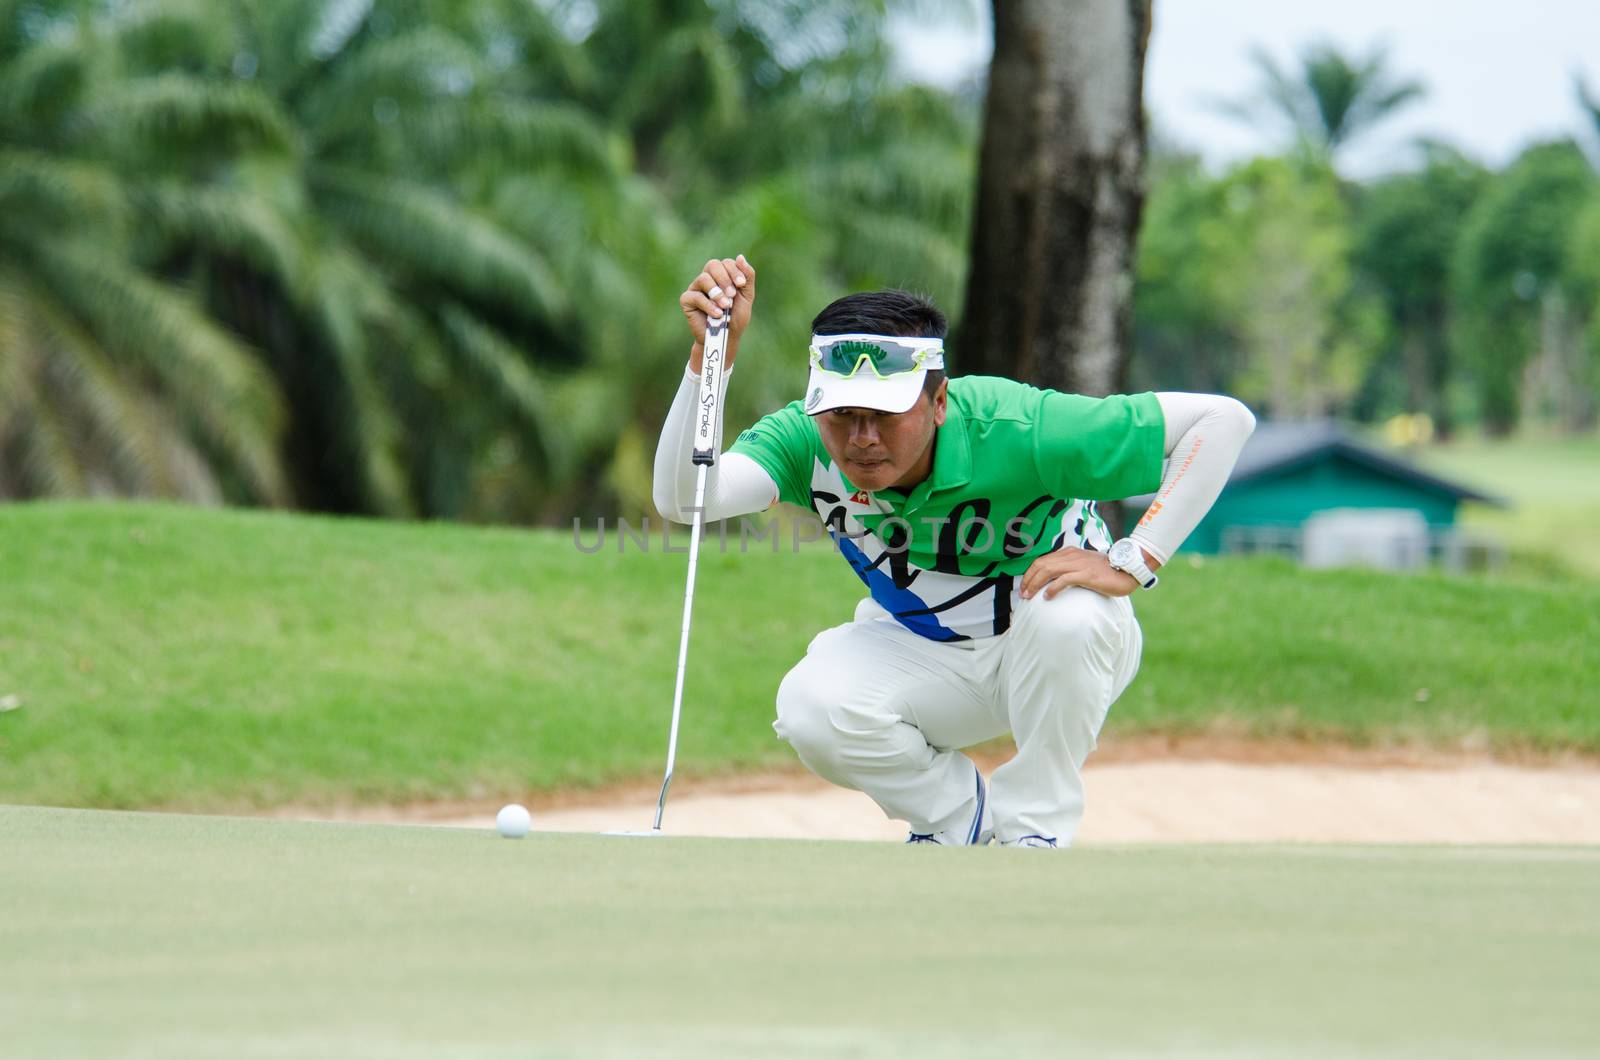 CHONBURI - JULY 31 : Lin Wen-tang of Chinese Taipei winner in King's Cup 2016 at Phoenix Gold Golf & Country Club Pattaya on July 31, 2016 in Chonburi, Thailand.